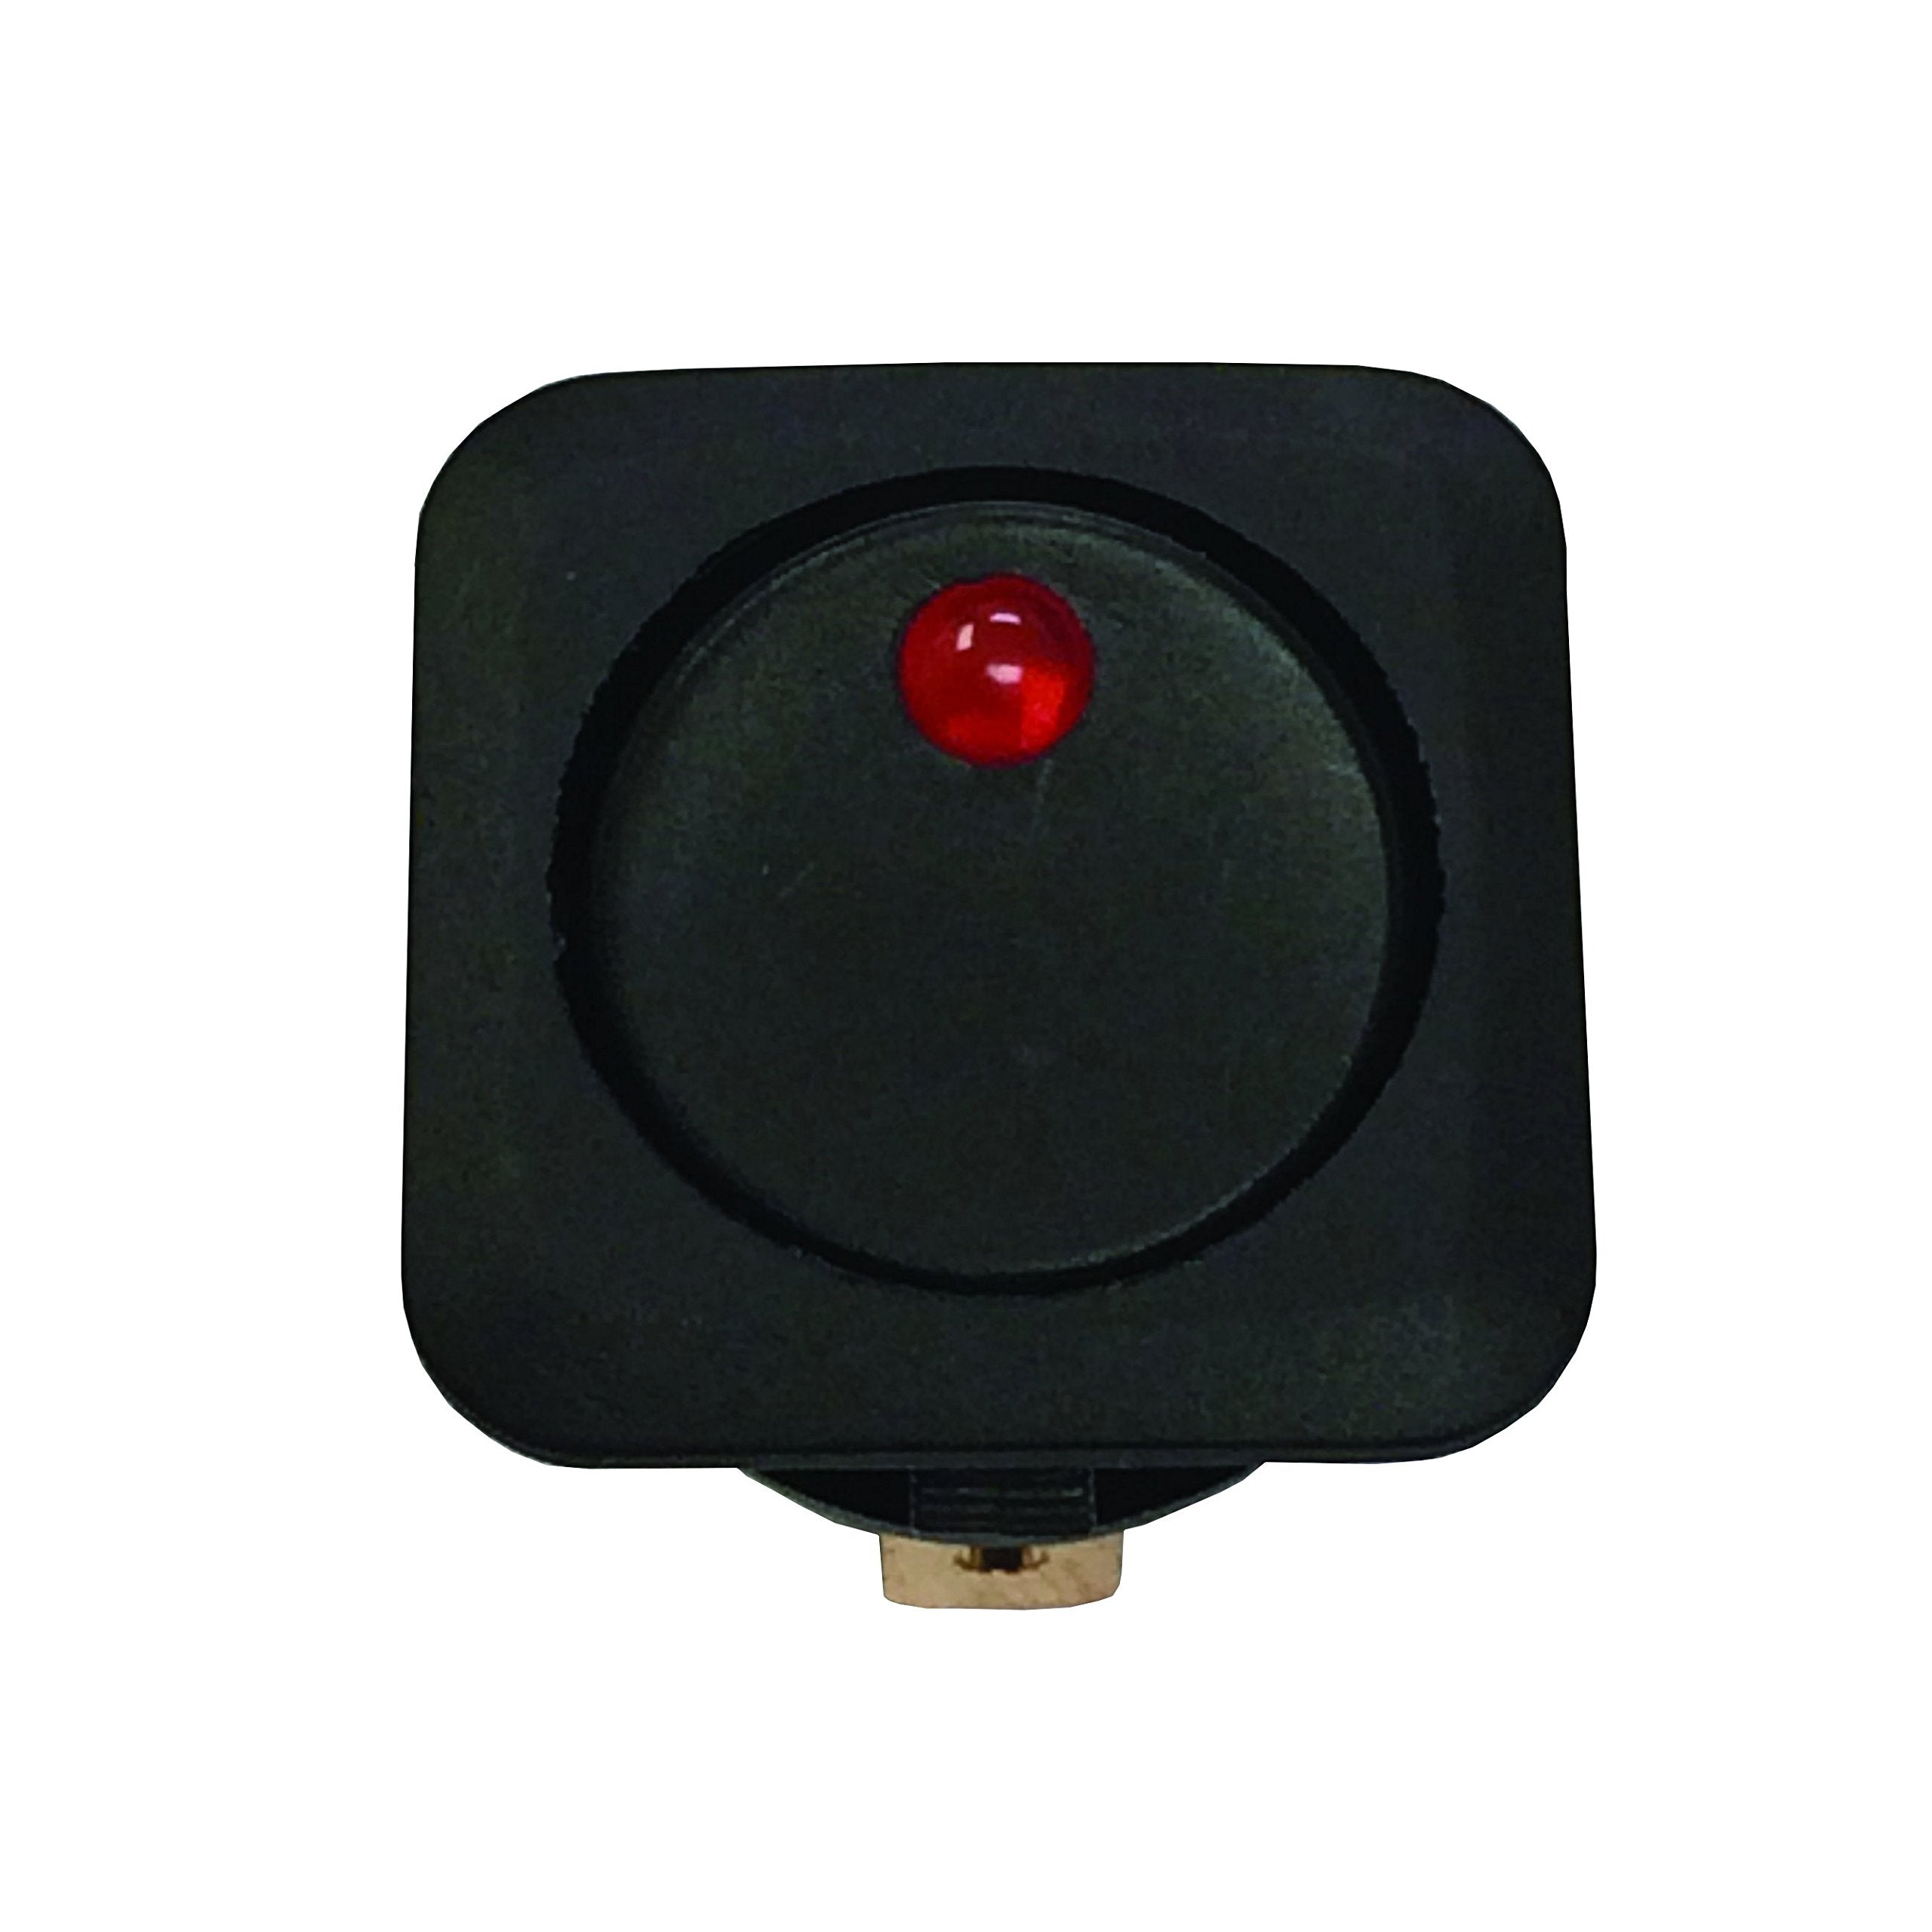 WirthCo 20550 Battery Doctor Red LED Illuminated Rocker Switch (ON/OFF 20 AMP)